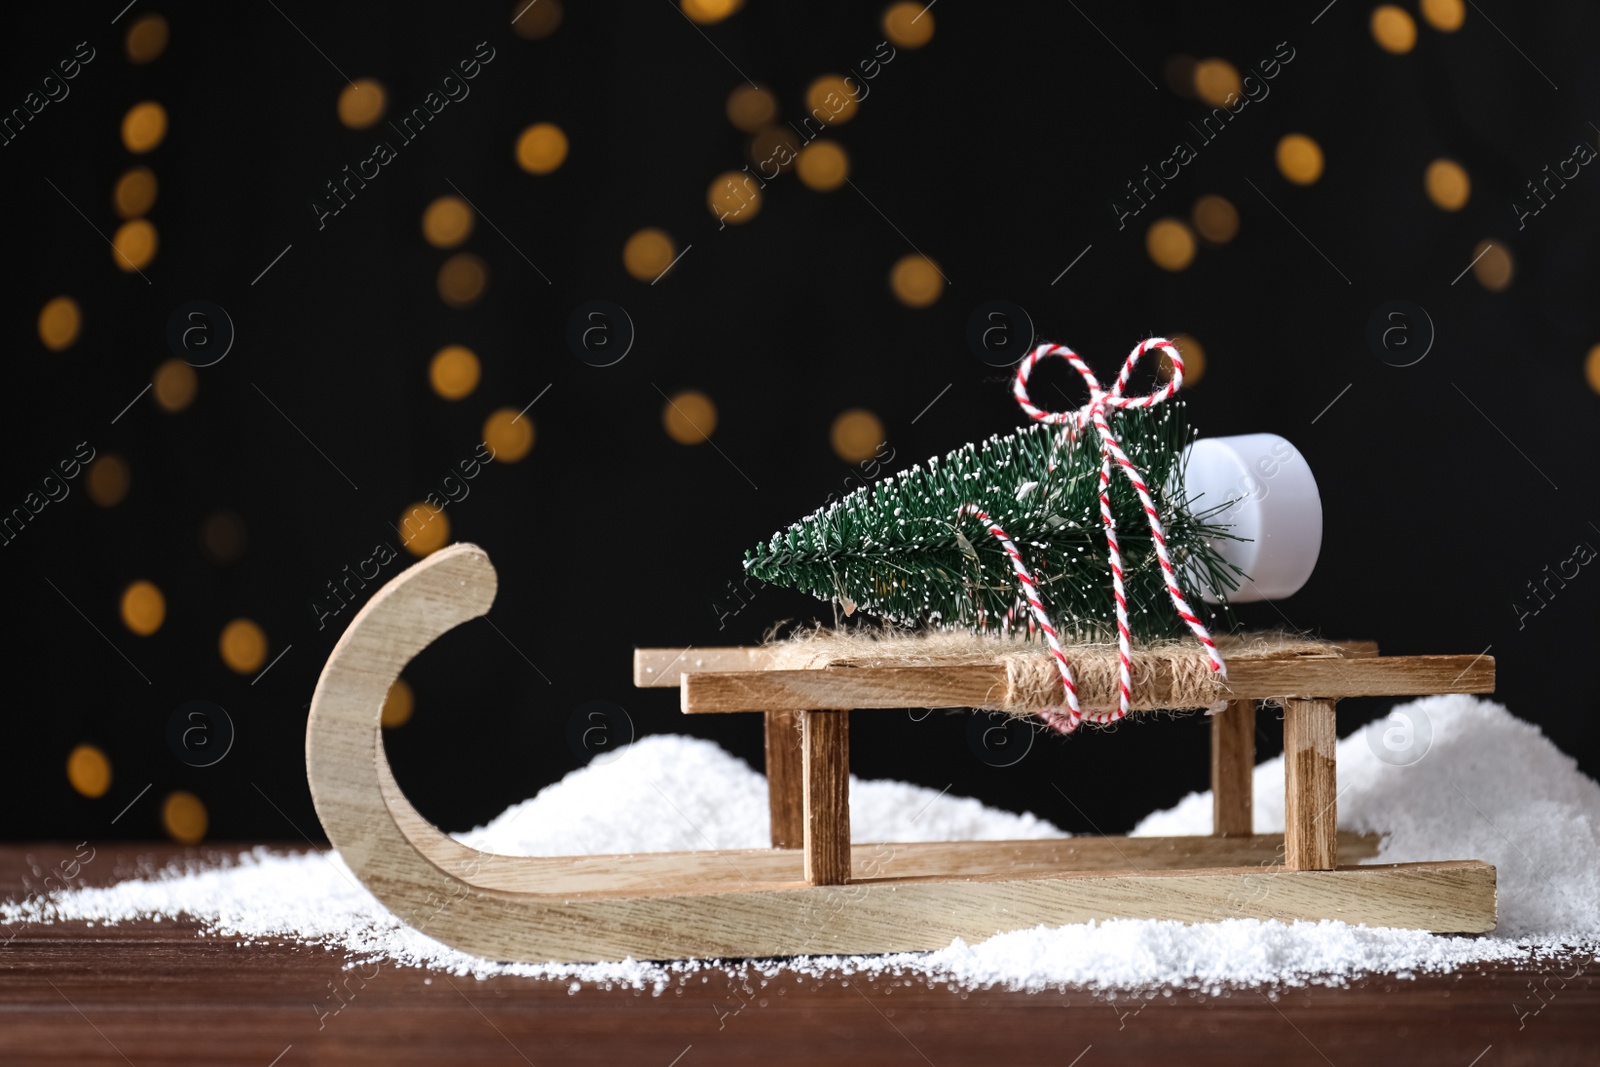 Photo of Sleigh with decorative Christmas tree on wooden table against blurred lights